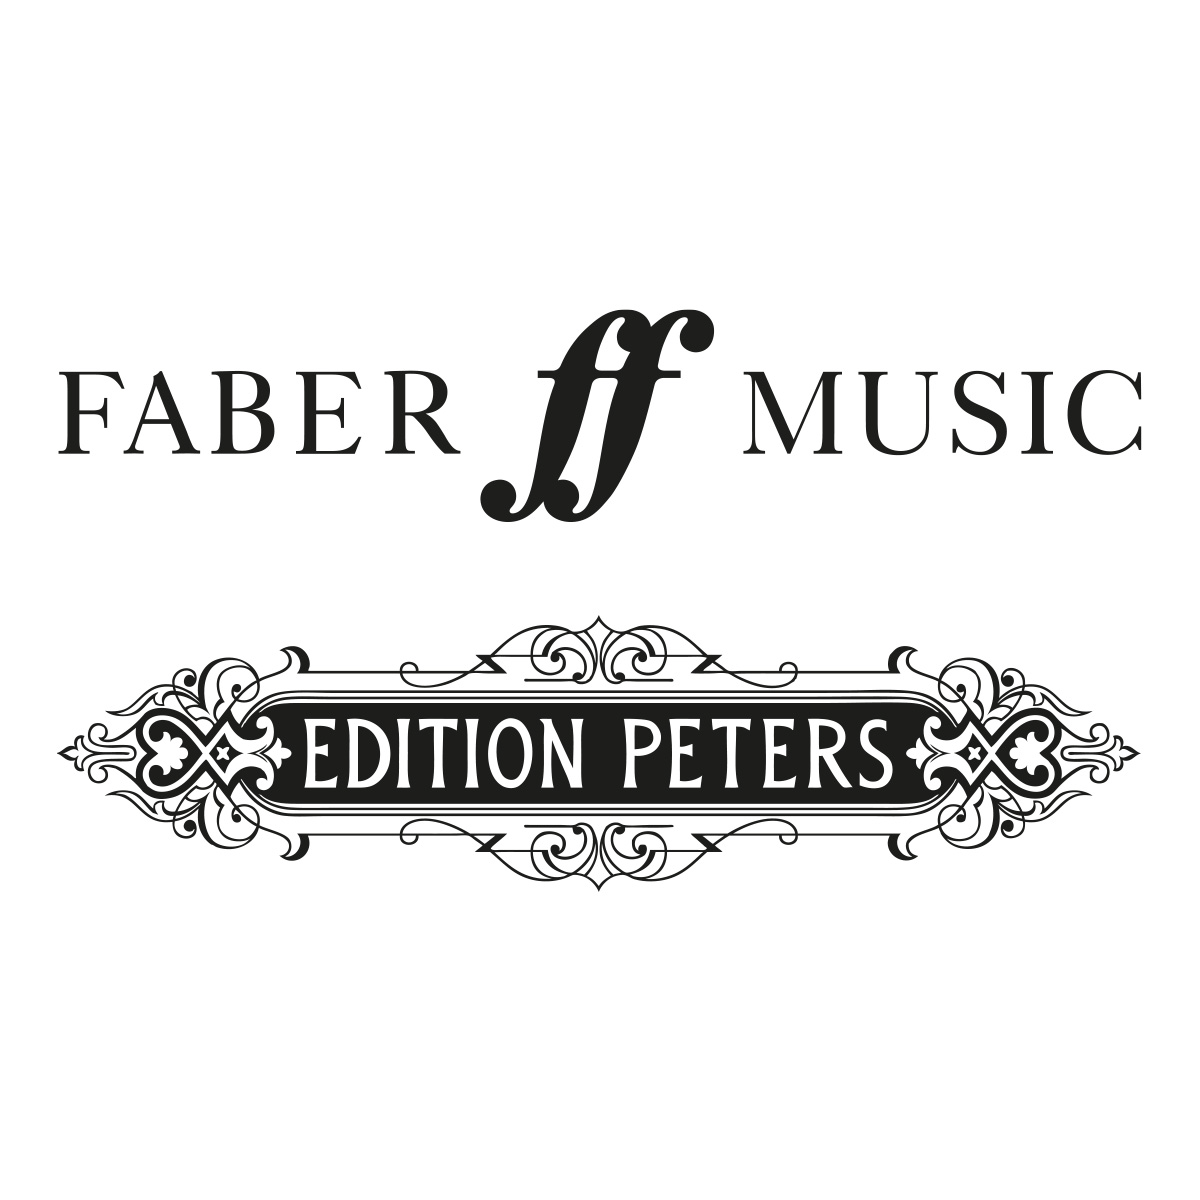 Faber Music / Edition Peters